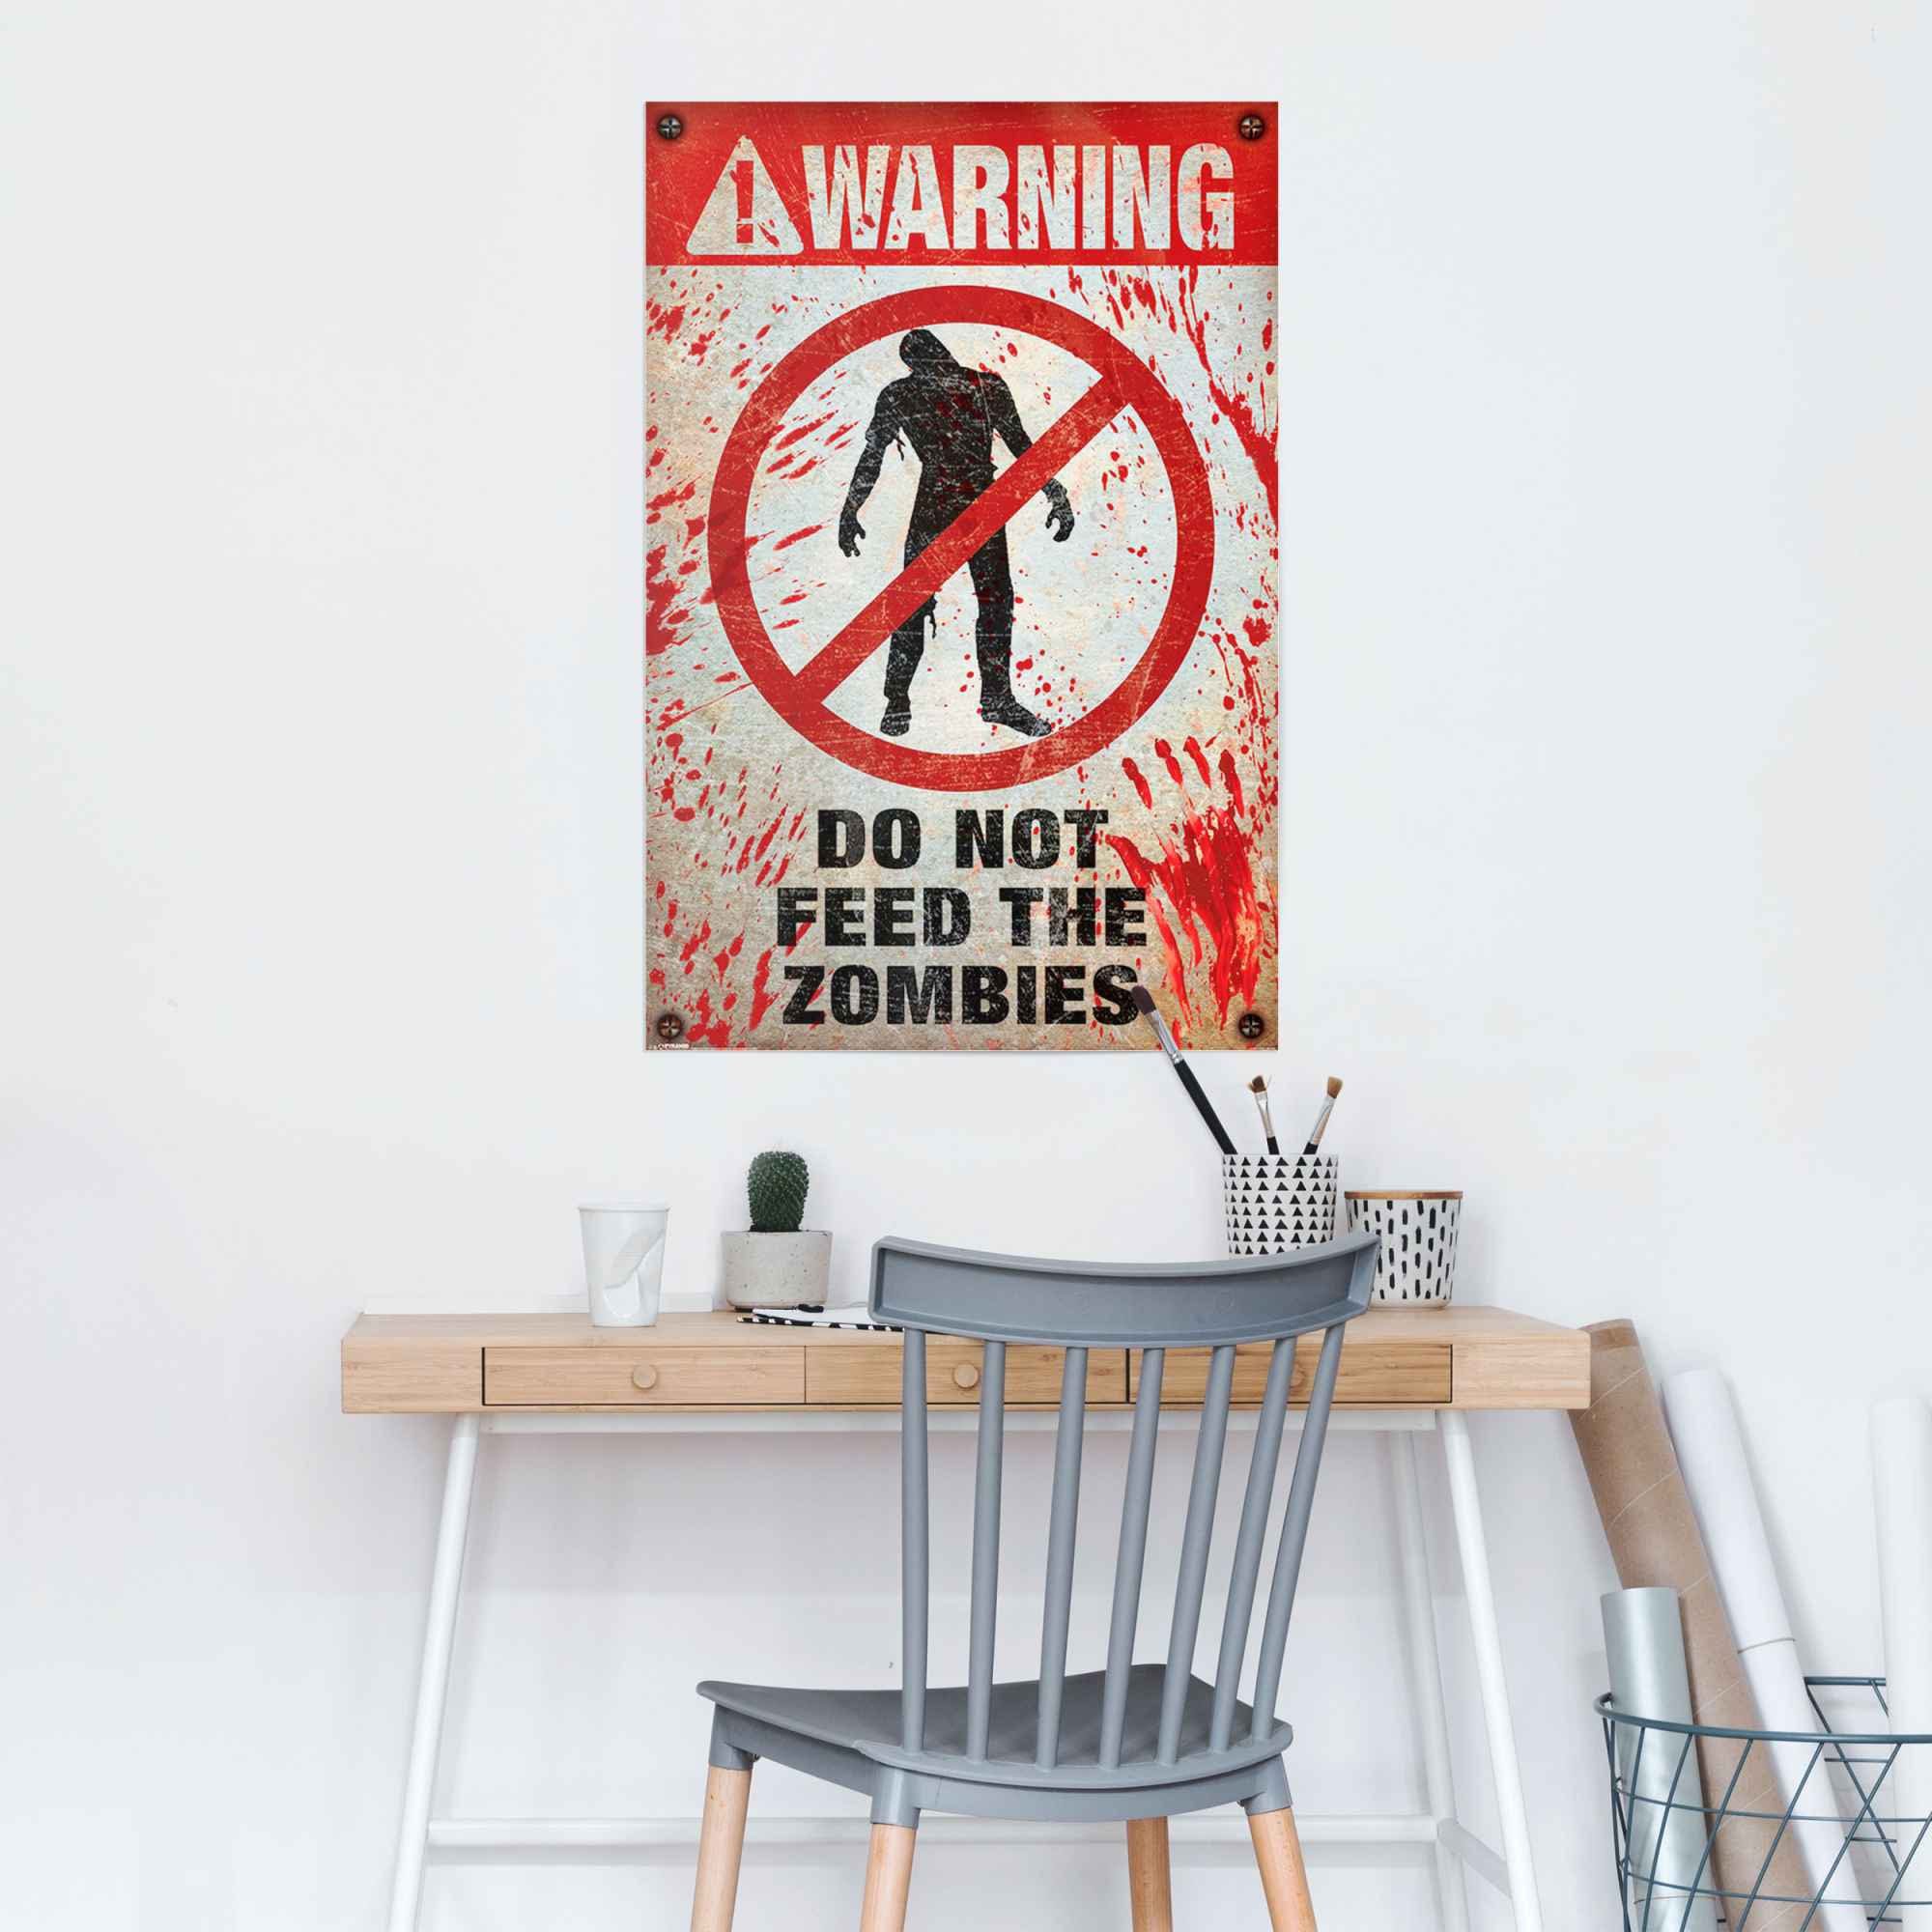 (1 Do Warning! Zombies, Poster St) Not Feed The Reinders!